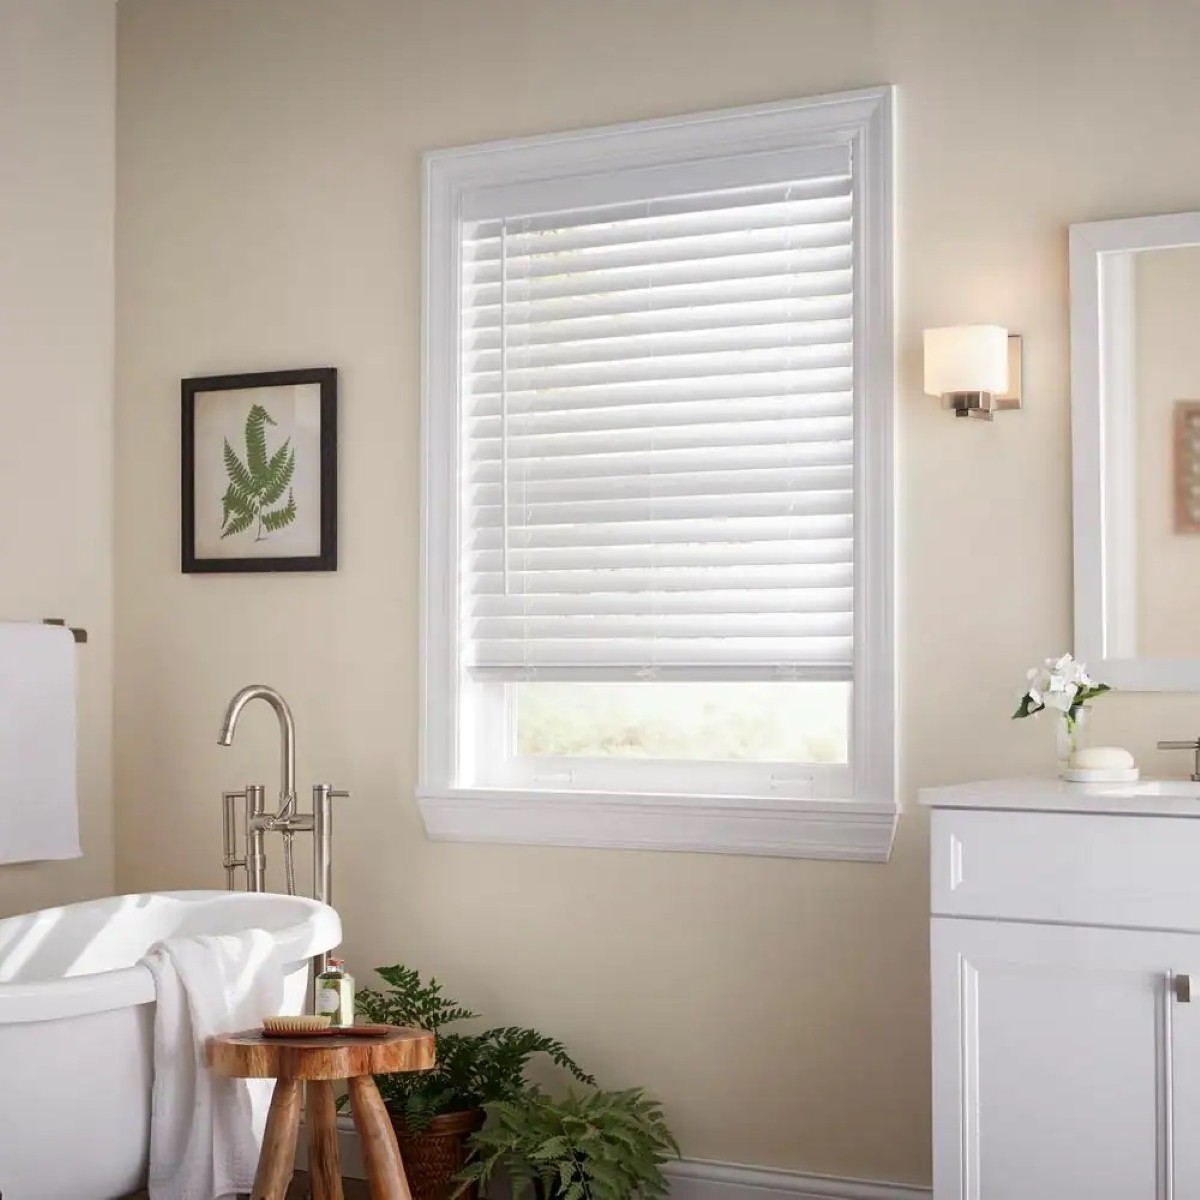 types of blinds - window with blinds in bathroom